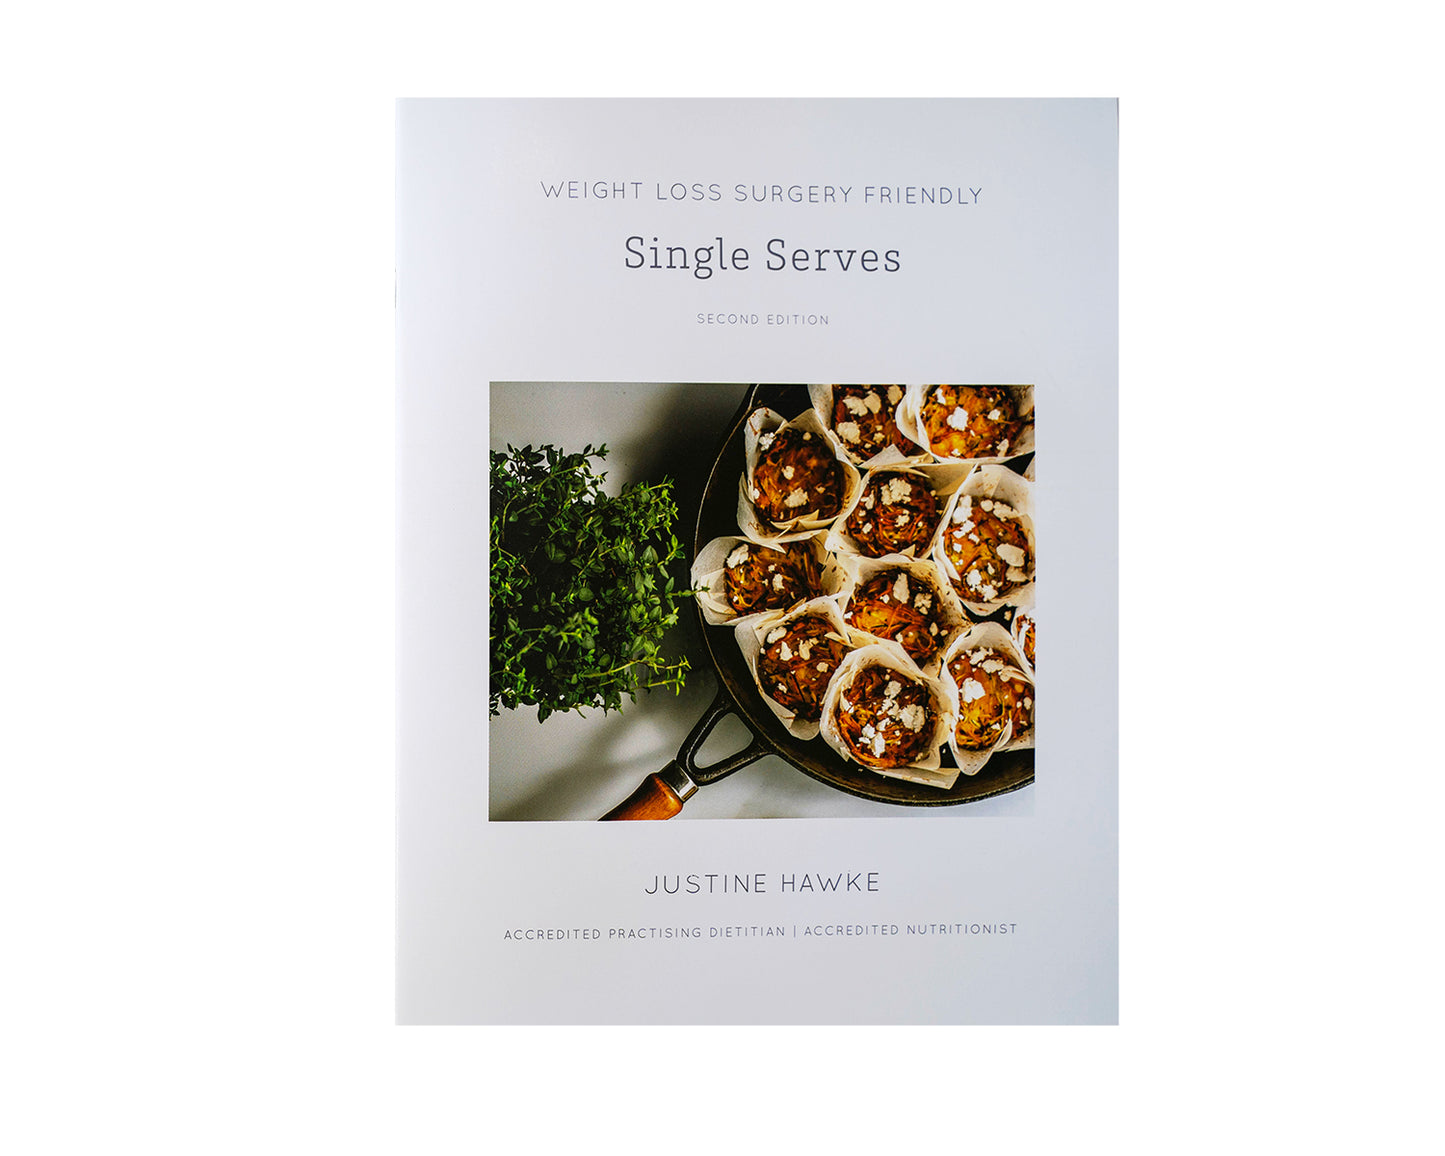 Single Serves Recipe Book Front Cover